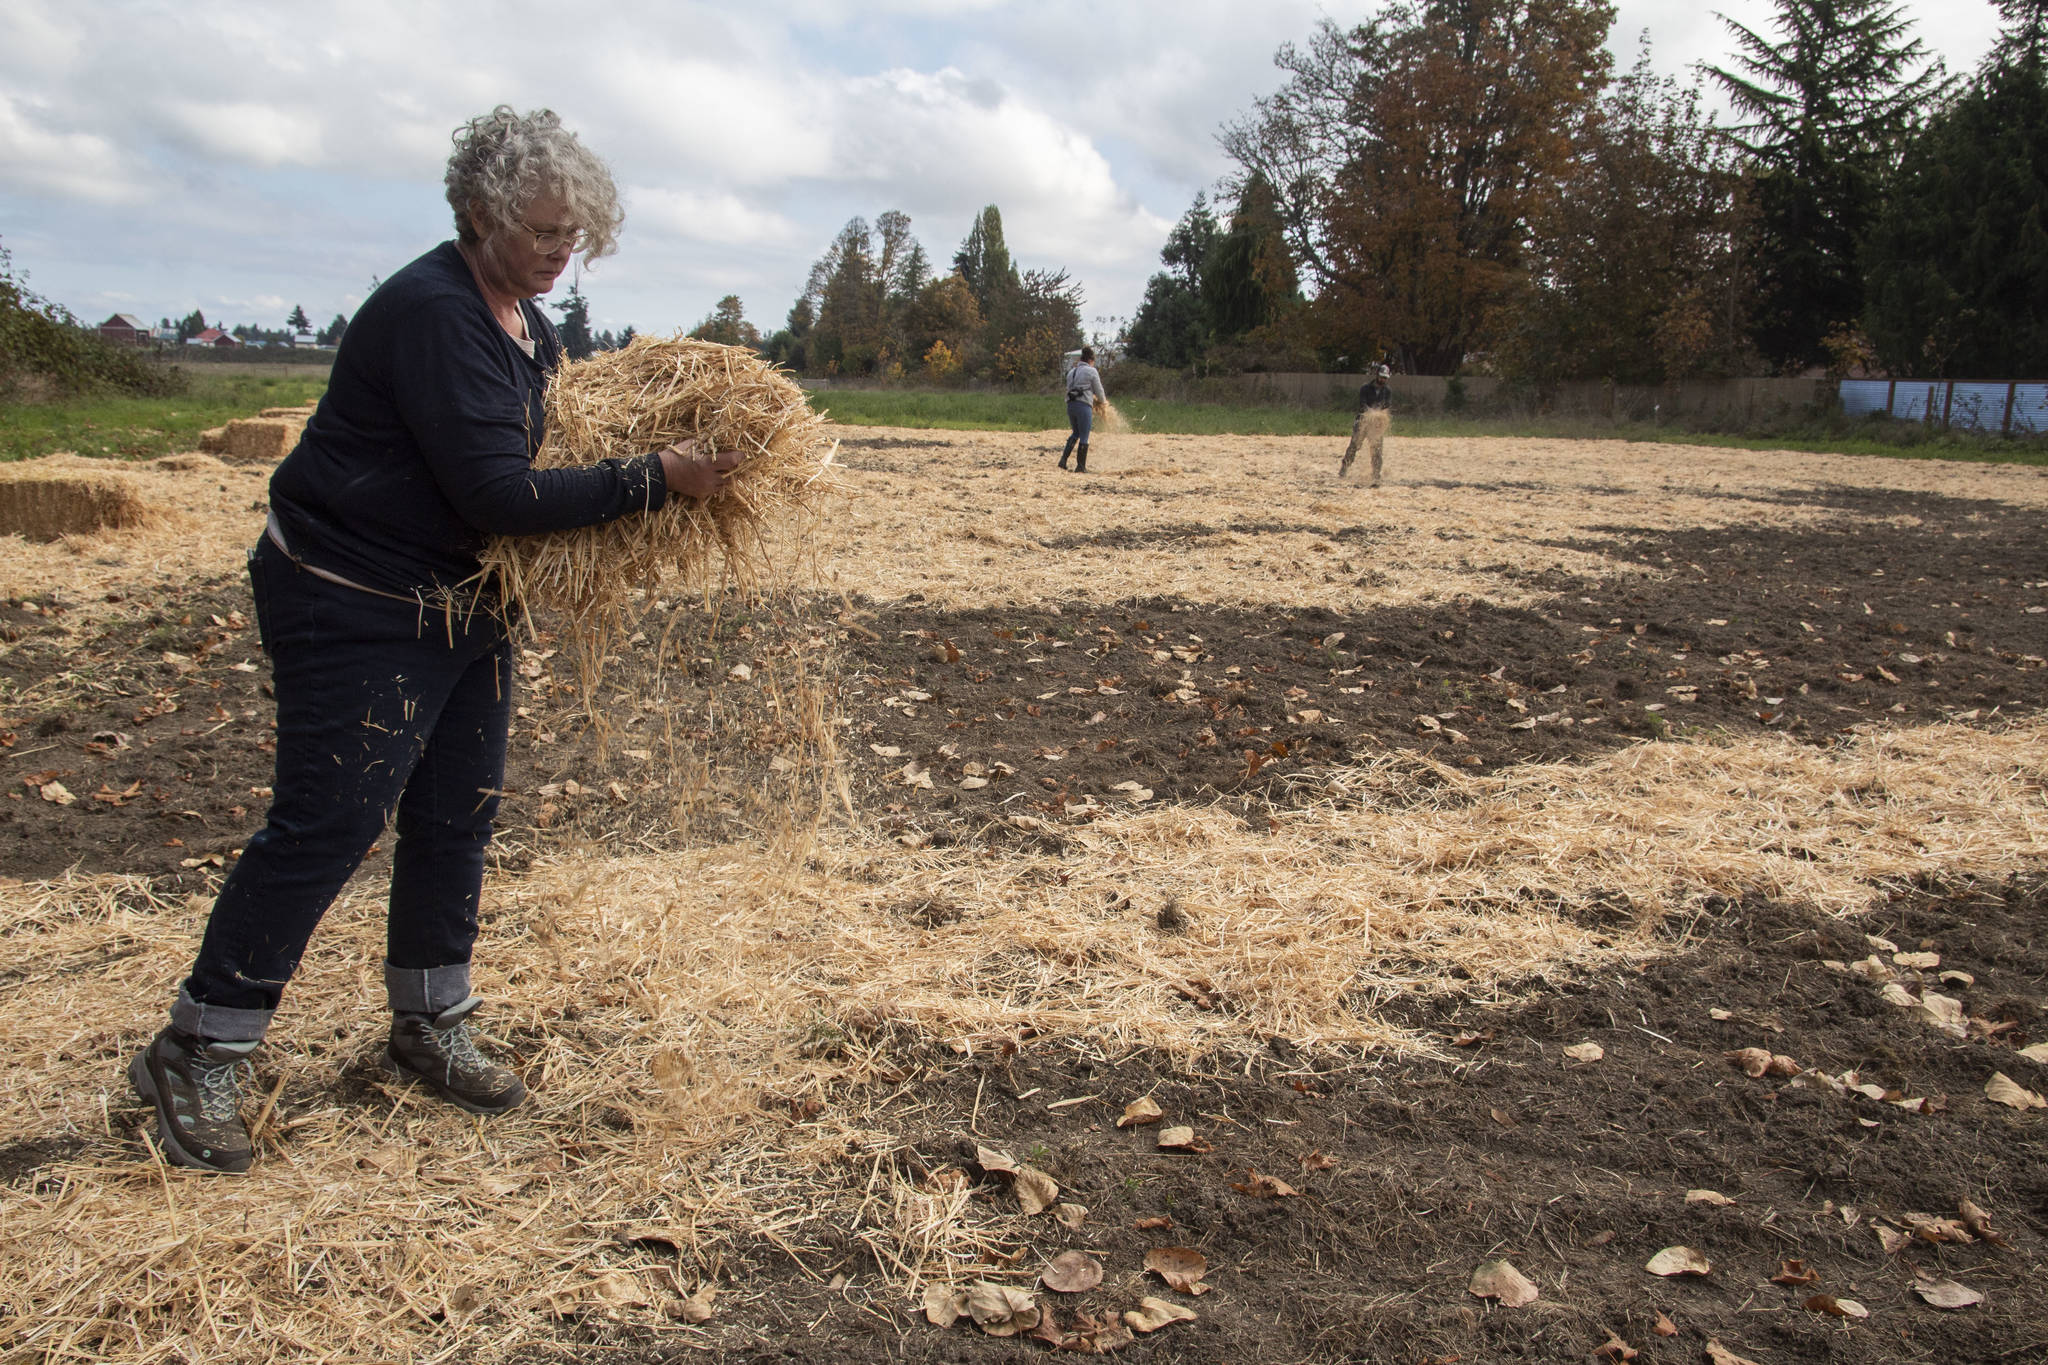 Jamestown S’Klallam Tribe descendant Teresa Smithlin spreads straw across the prairie to protect the seeds over the winter. (Tiffany Royal)